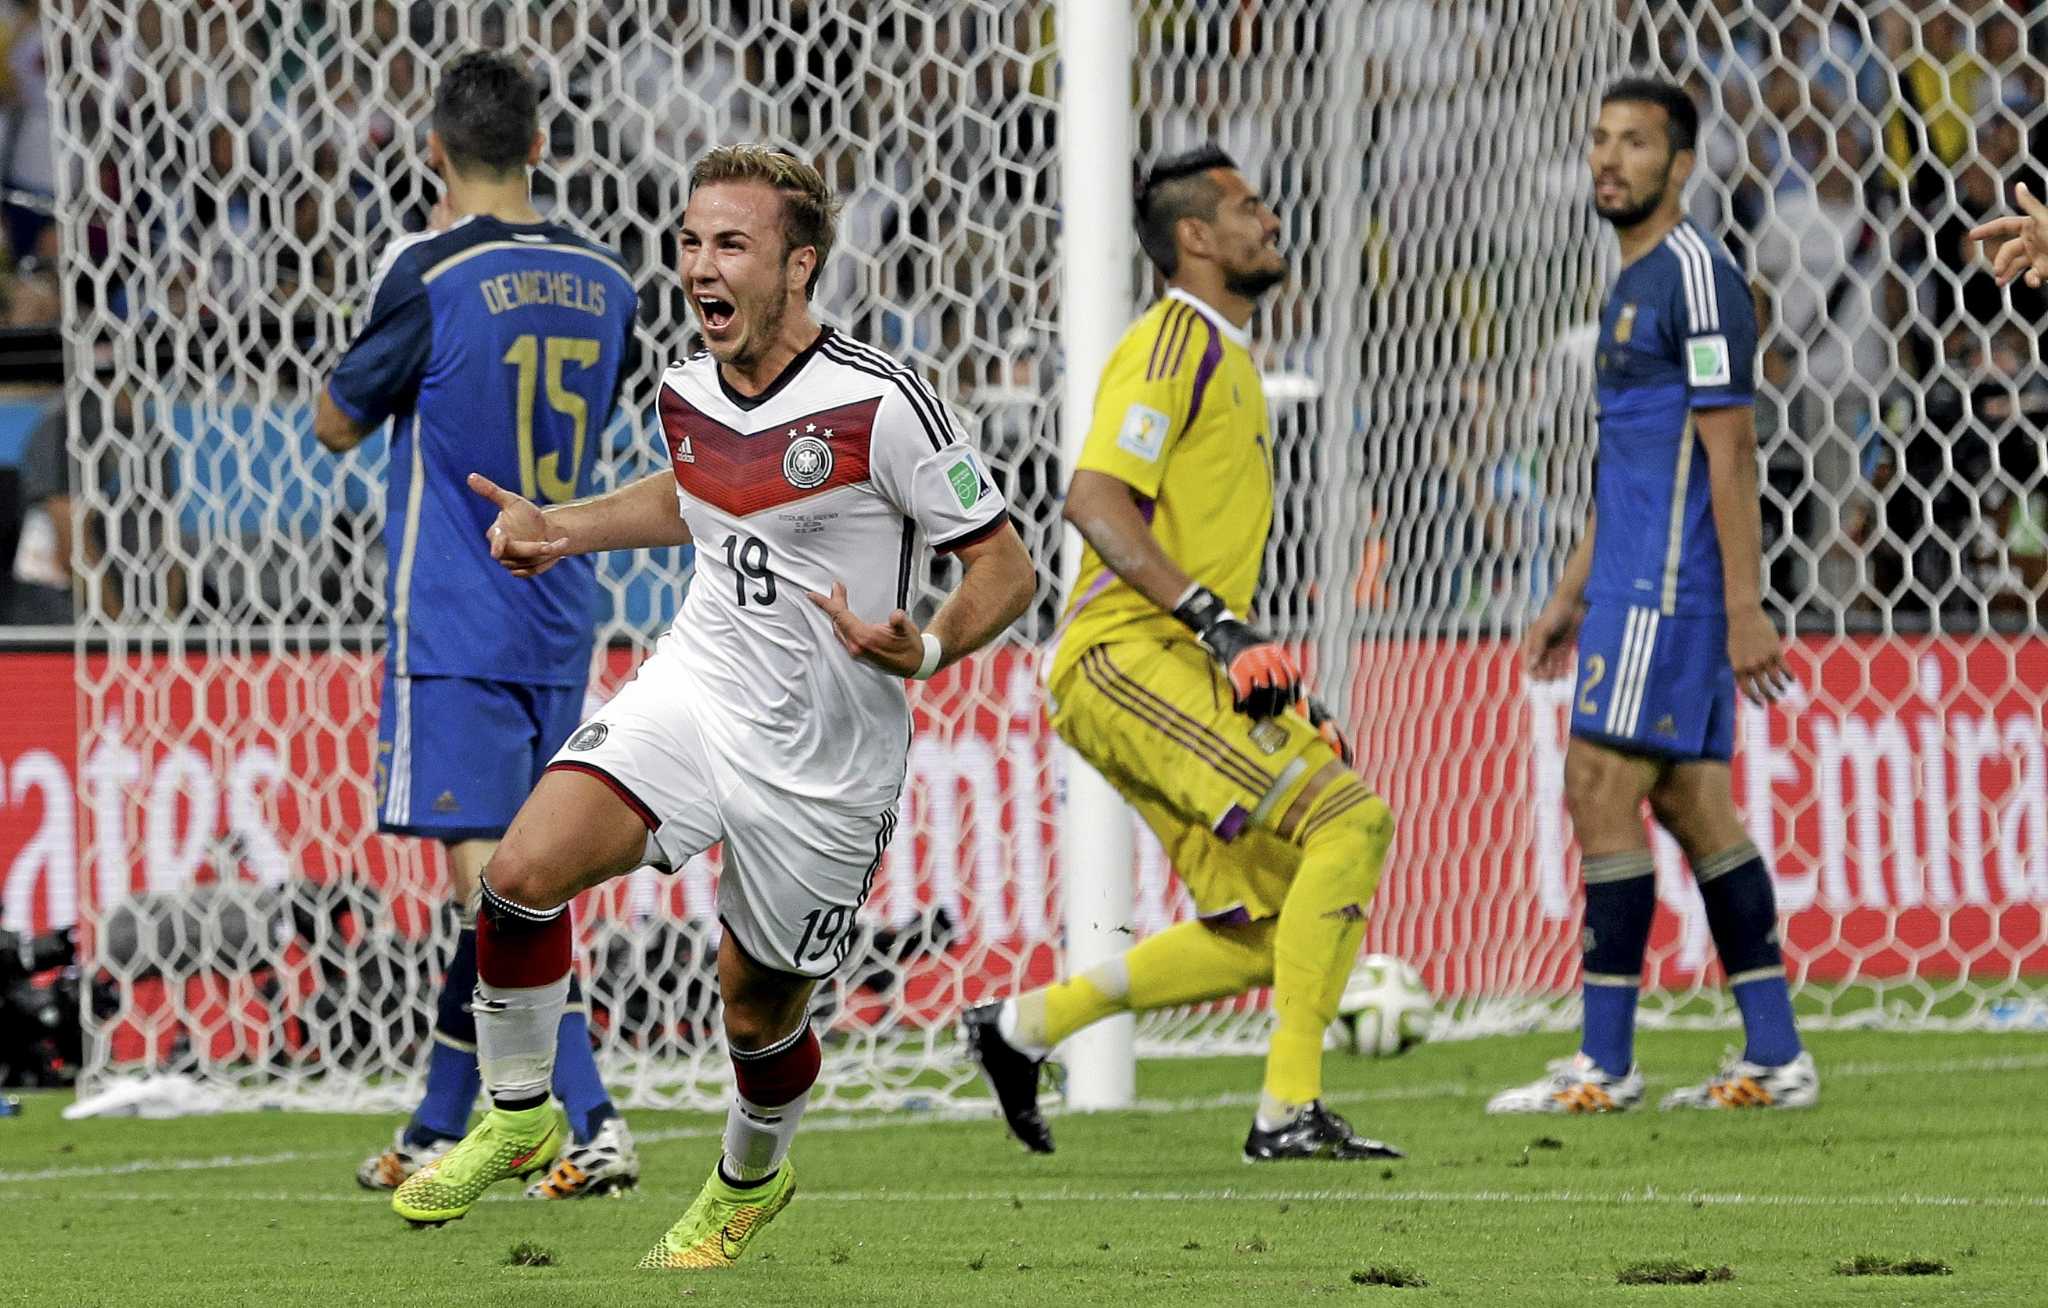 Germany beats Argentina 1-0 to win 2014 World Cup in Brazil